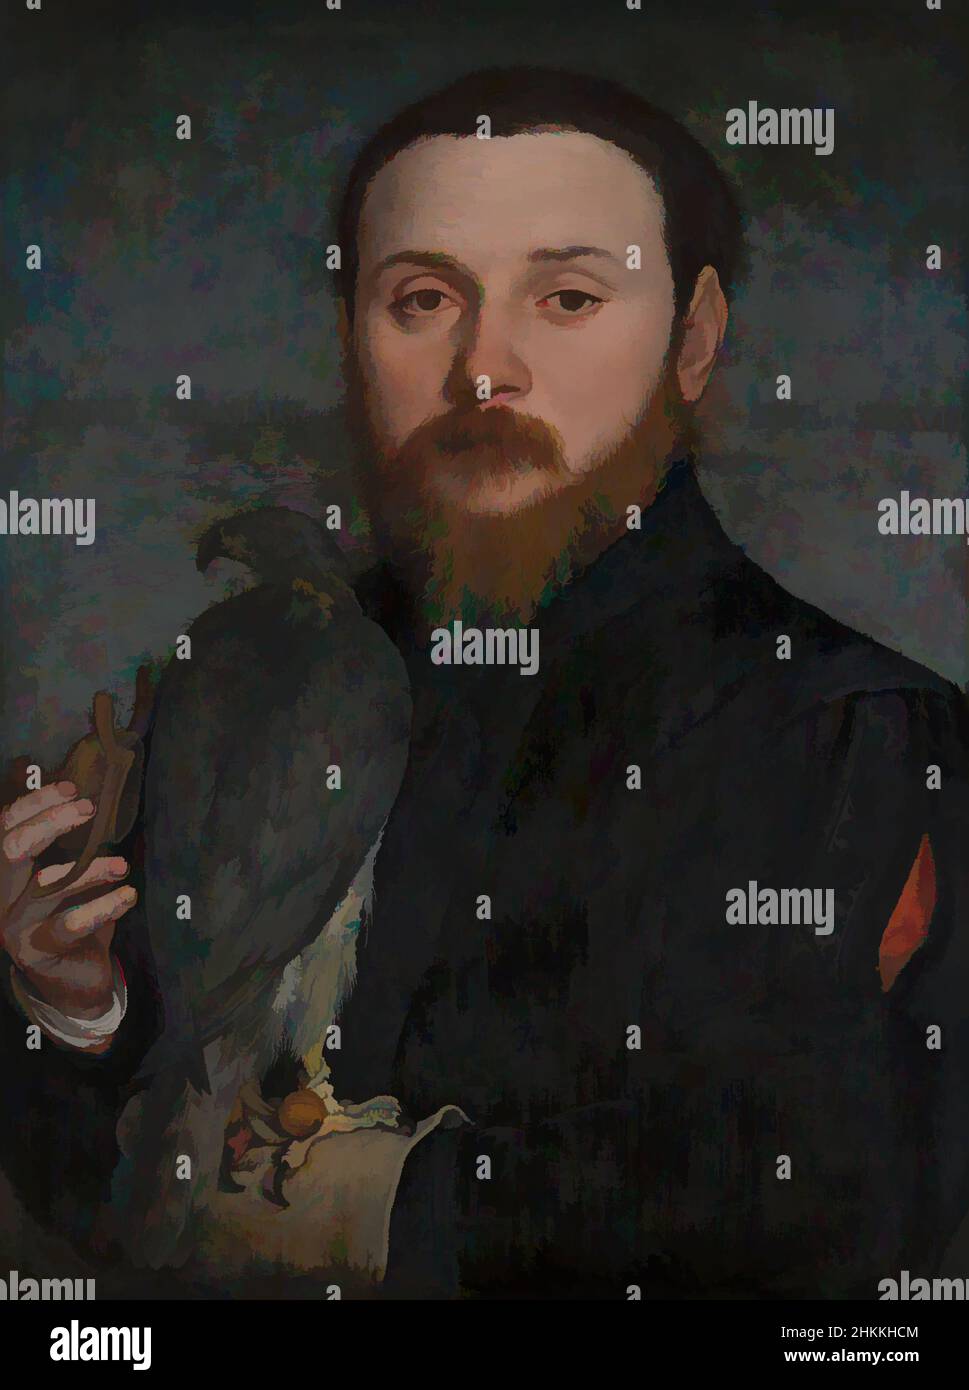 Art inspired by Portrait of a nobleman with hawk, Hans Holbein de Jonge, 1542, Classic works modernized by Artotop with a splash of modernity. Shapes, color and value, eye-catching visual impact on art. Emotions through freedom of artworks in a contemporary way. A timeless message pursuing a wildly creative new direction. Artists turning to the digital medium and creating the Artotop NFT Stock Photo